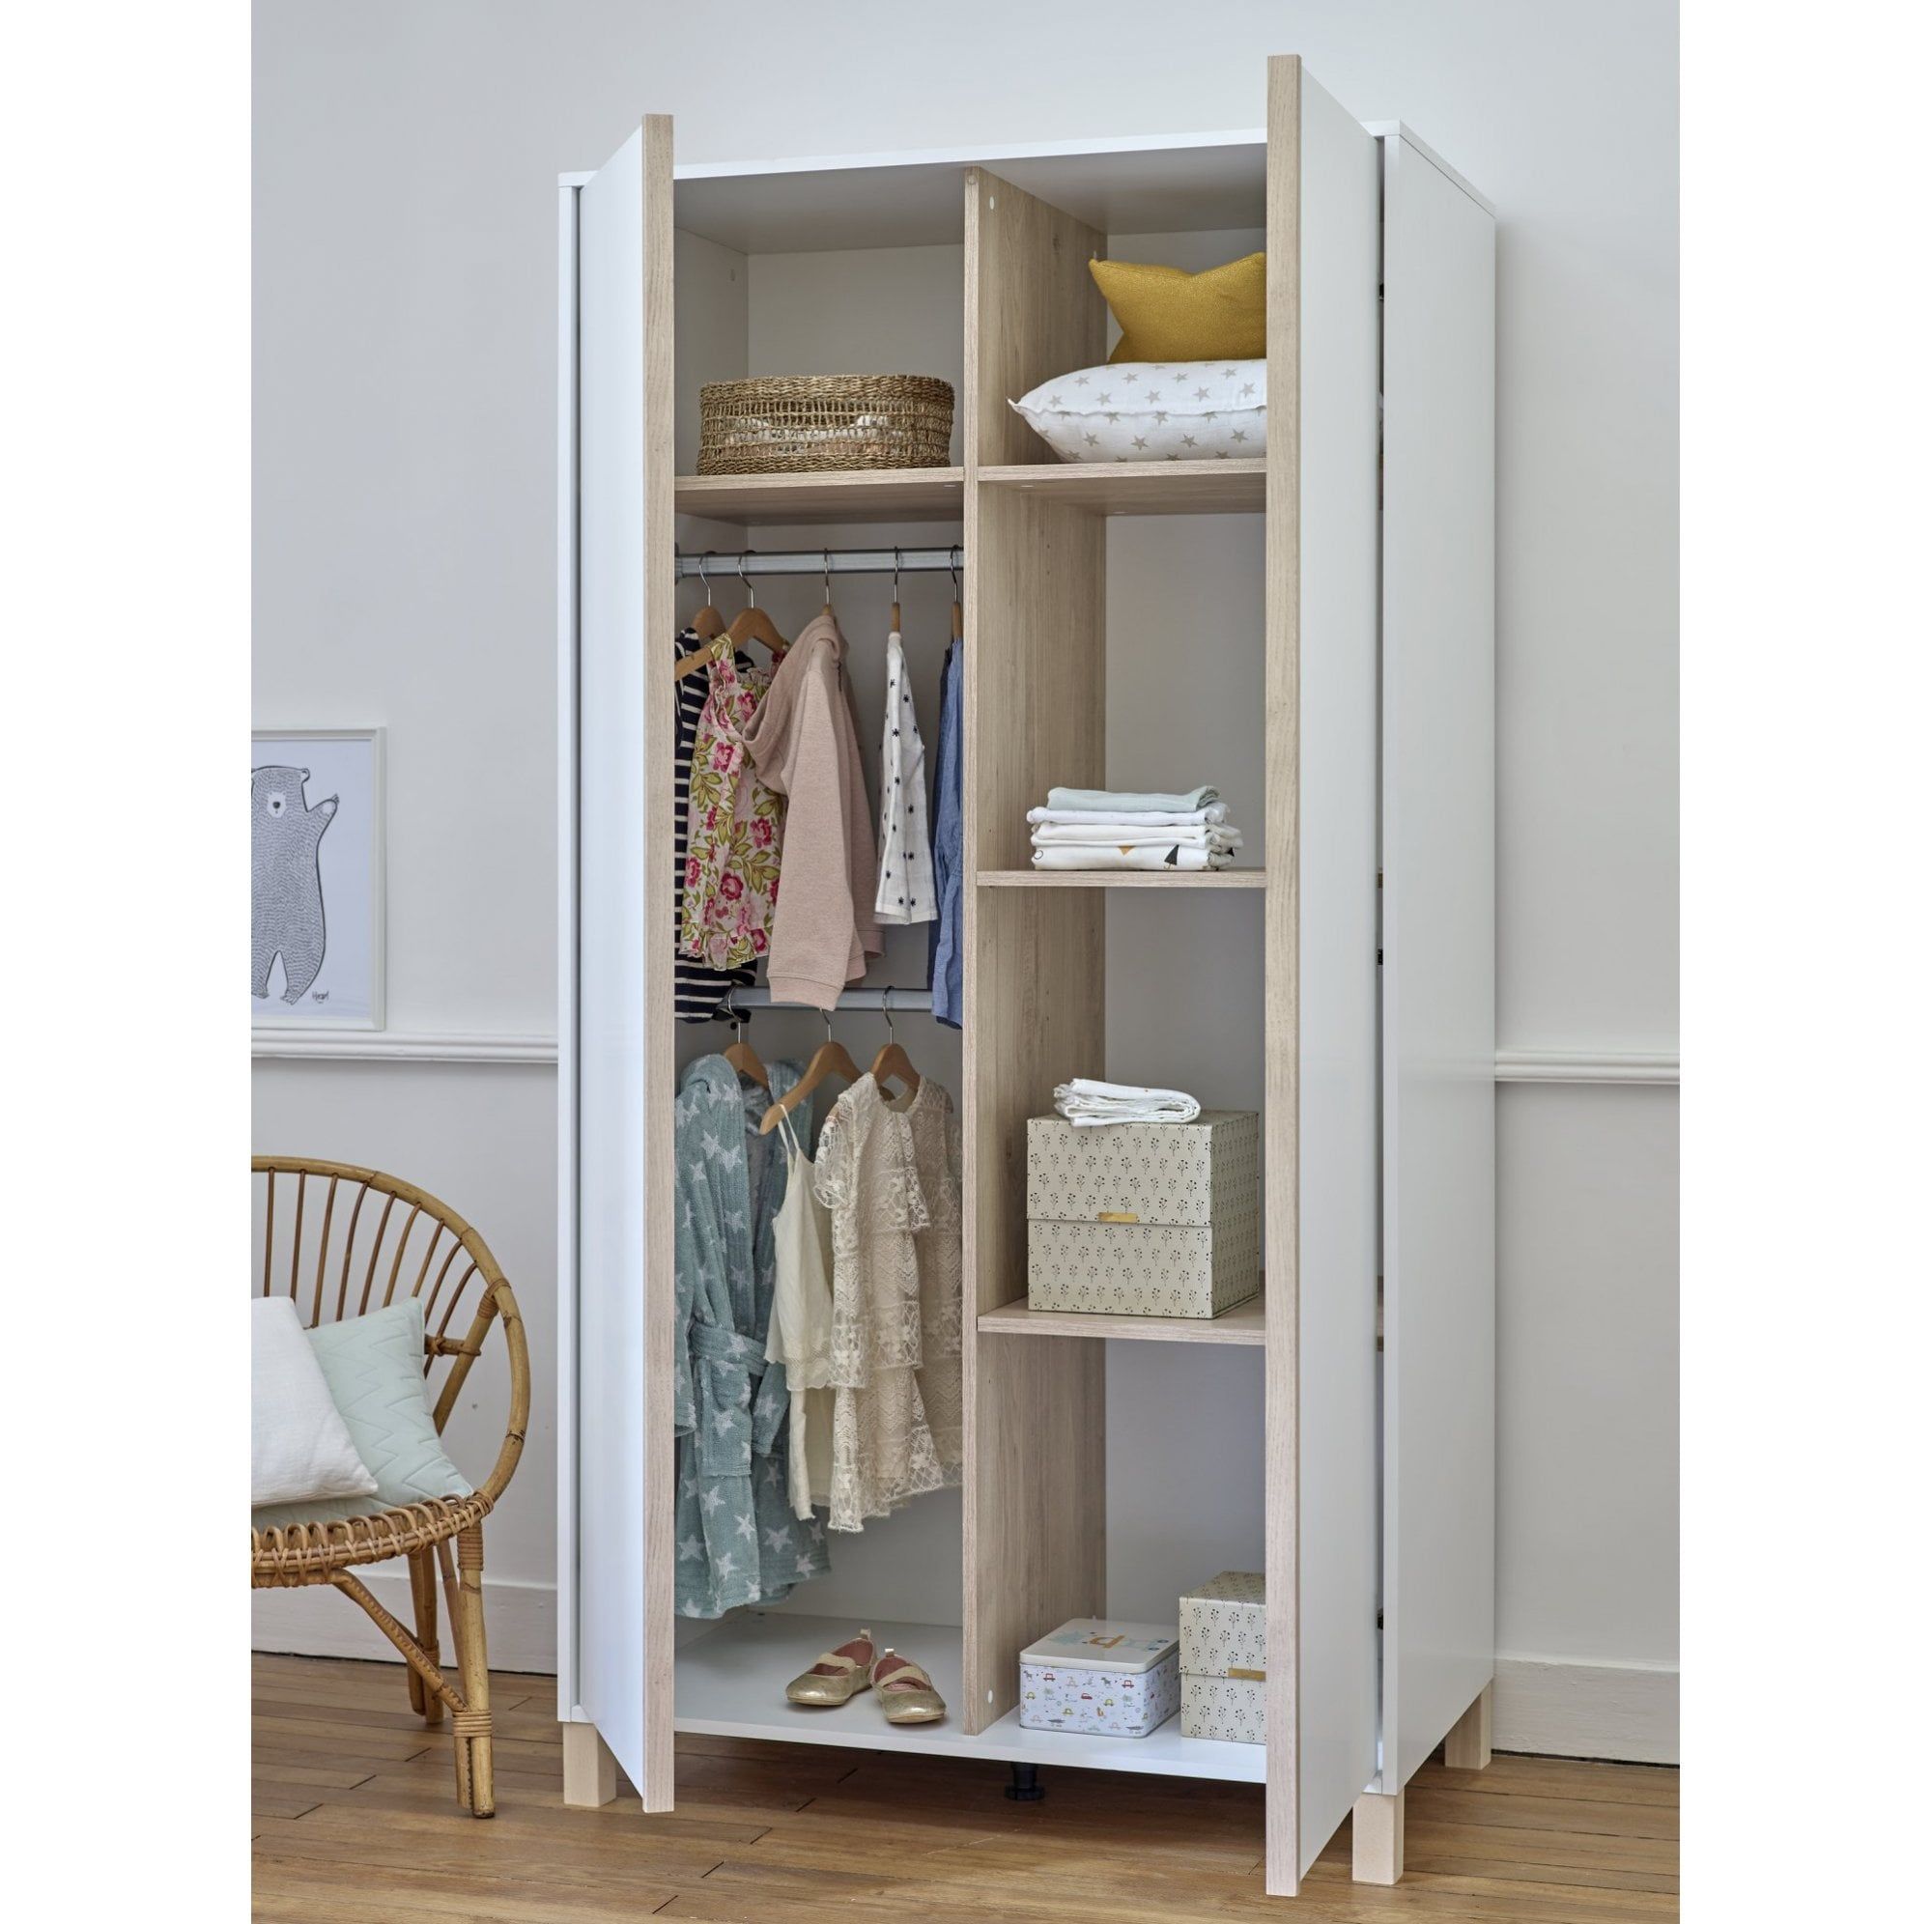 The Children's Furniture Company Throughout Double Rail Childrens Wardrobes (View 7 of 15)